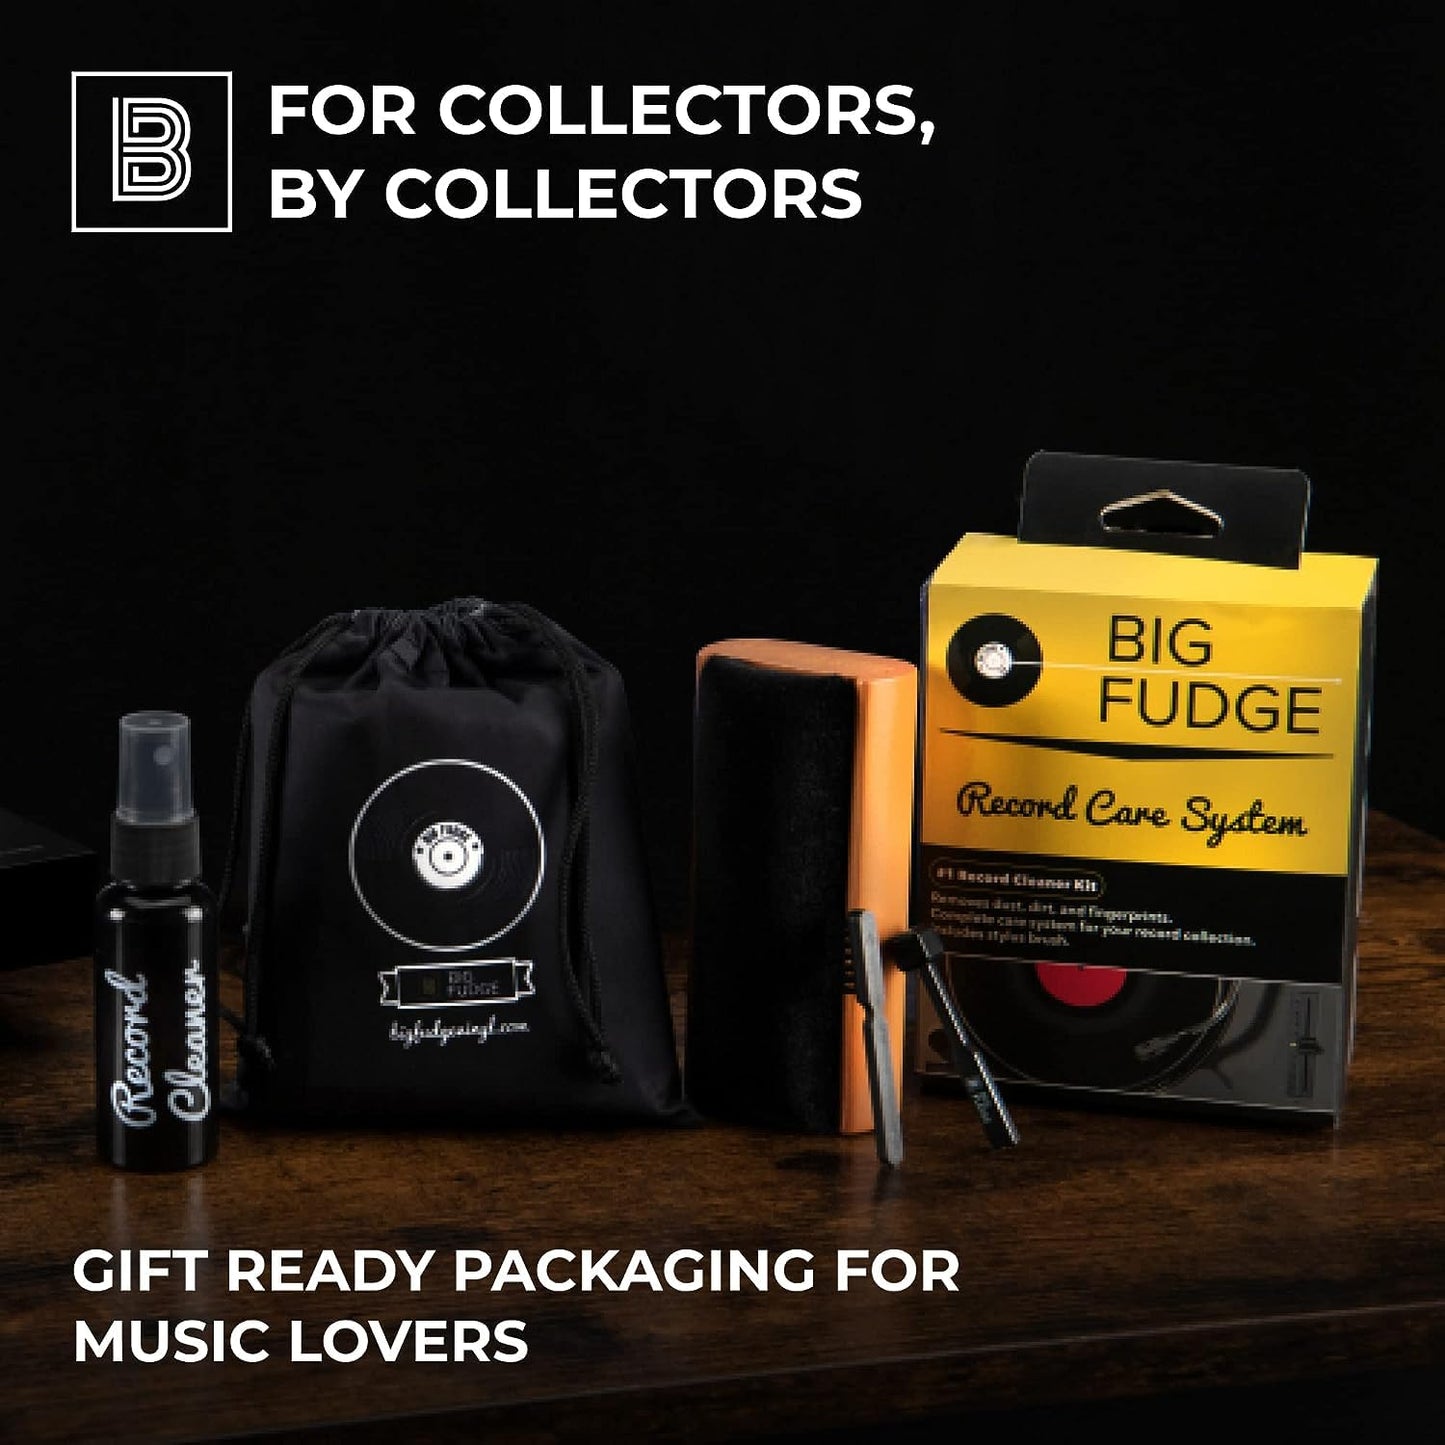 Big Fudge Vinyl Record Cleaning Kit - Complete 4-in-1 - Includes Ultra-Soft Velvet Record Brush, XL Cleaning Liquid, Stylus Brush and Storage Pouch! Will NOT Scratch Your Records